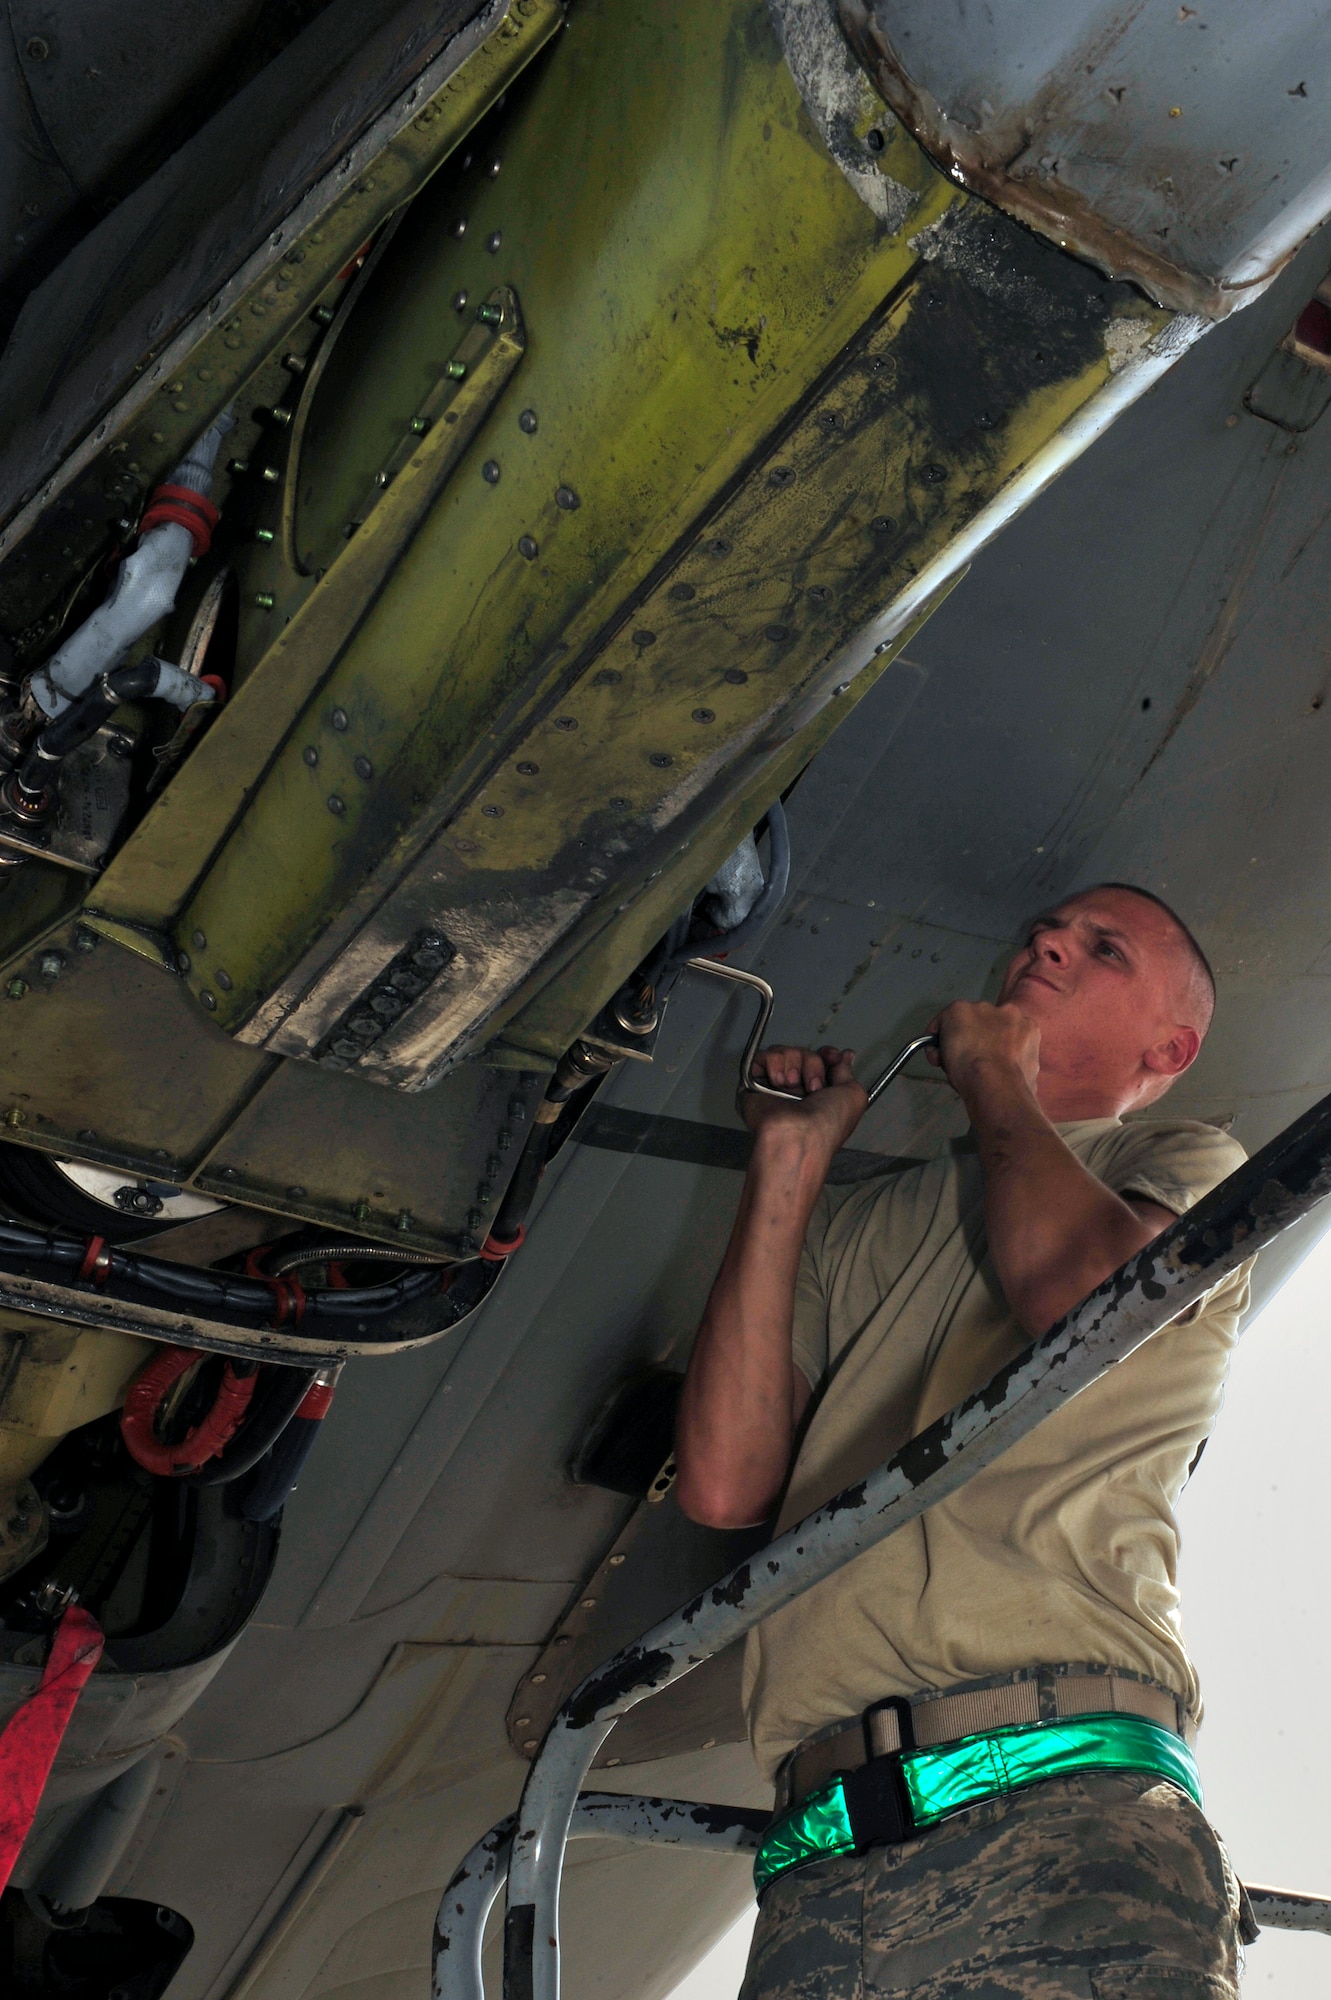 SOUTHWEST ASIA -Senior Airman Corey Keele, 380th Expeditionary Maintenance
Squadron, uses a speed handle to lower the boom on a KC-10 Extender Aug. 29,
2009. Airman Keele is deployed from McGuire Air Force Base, N.J., and grew
up in Long View, Wash. (U.S. Air Force photo/Tech. Sgt. Charles Larkin Sr)